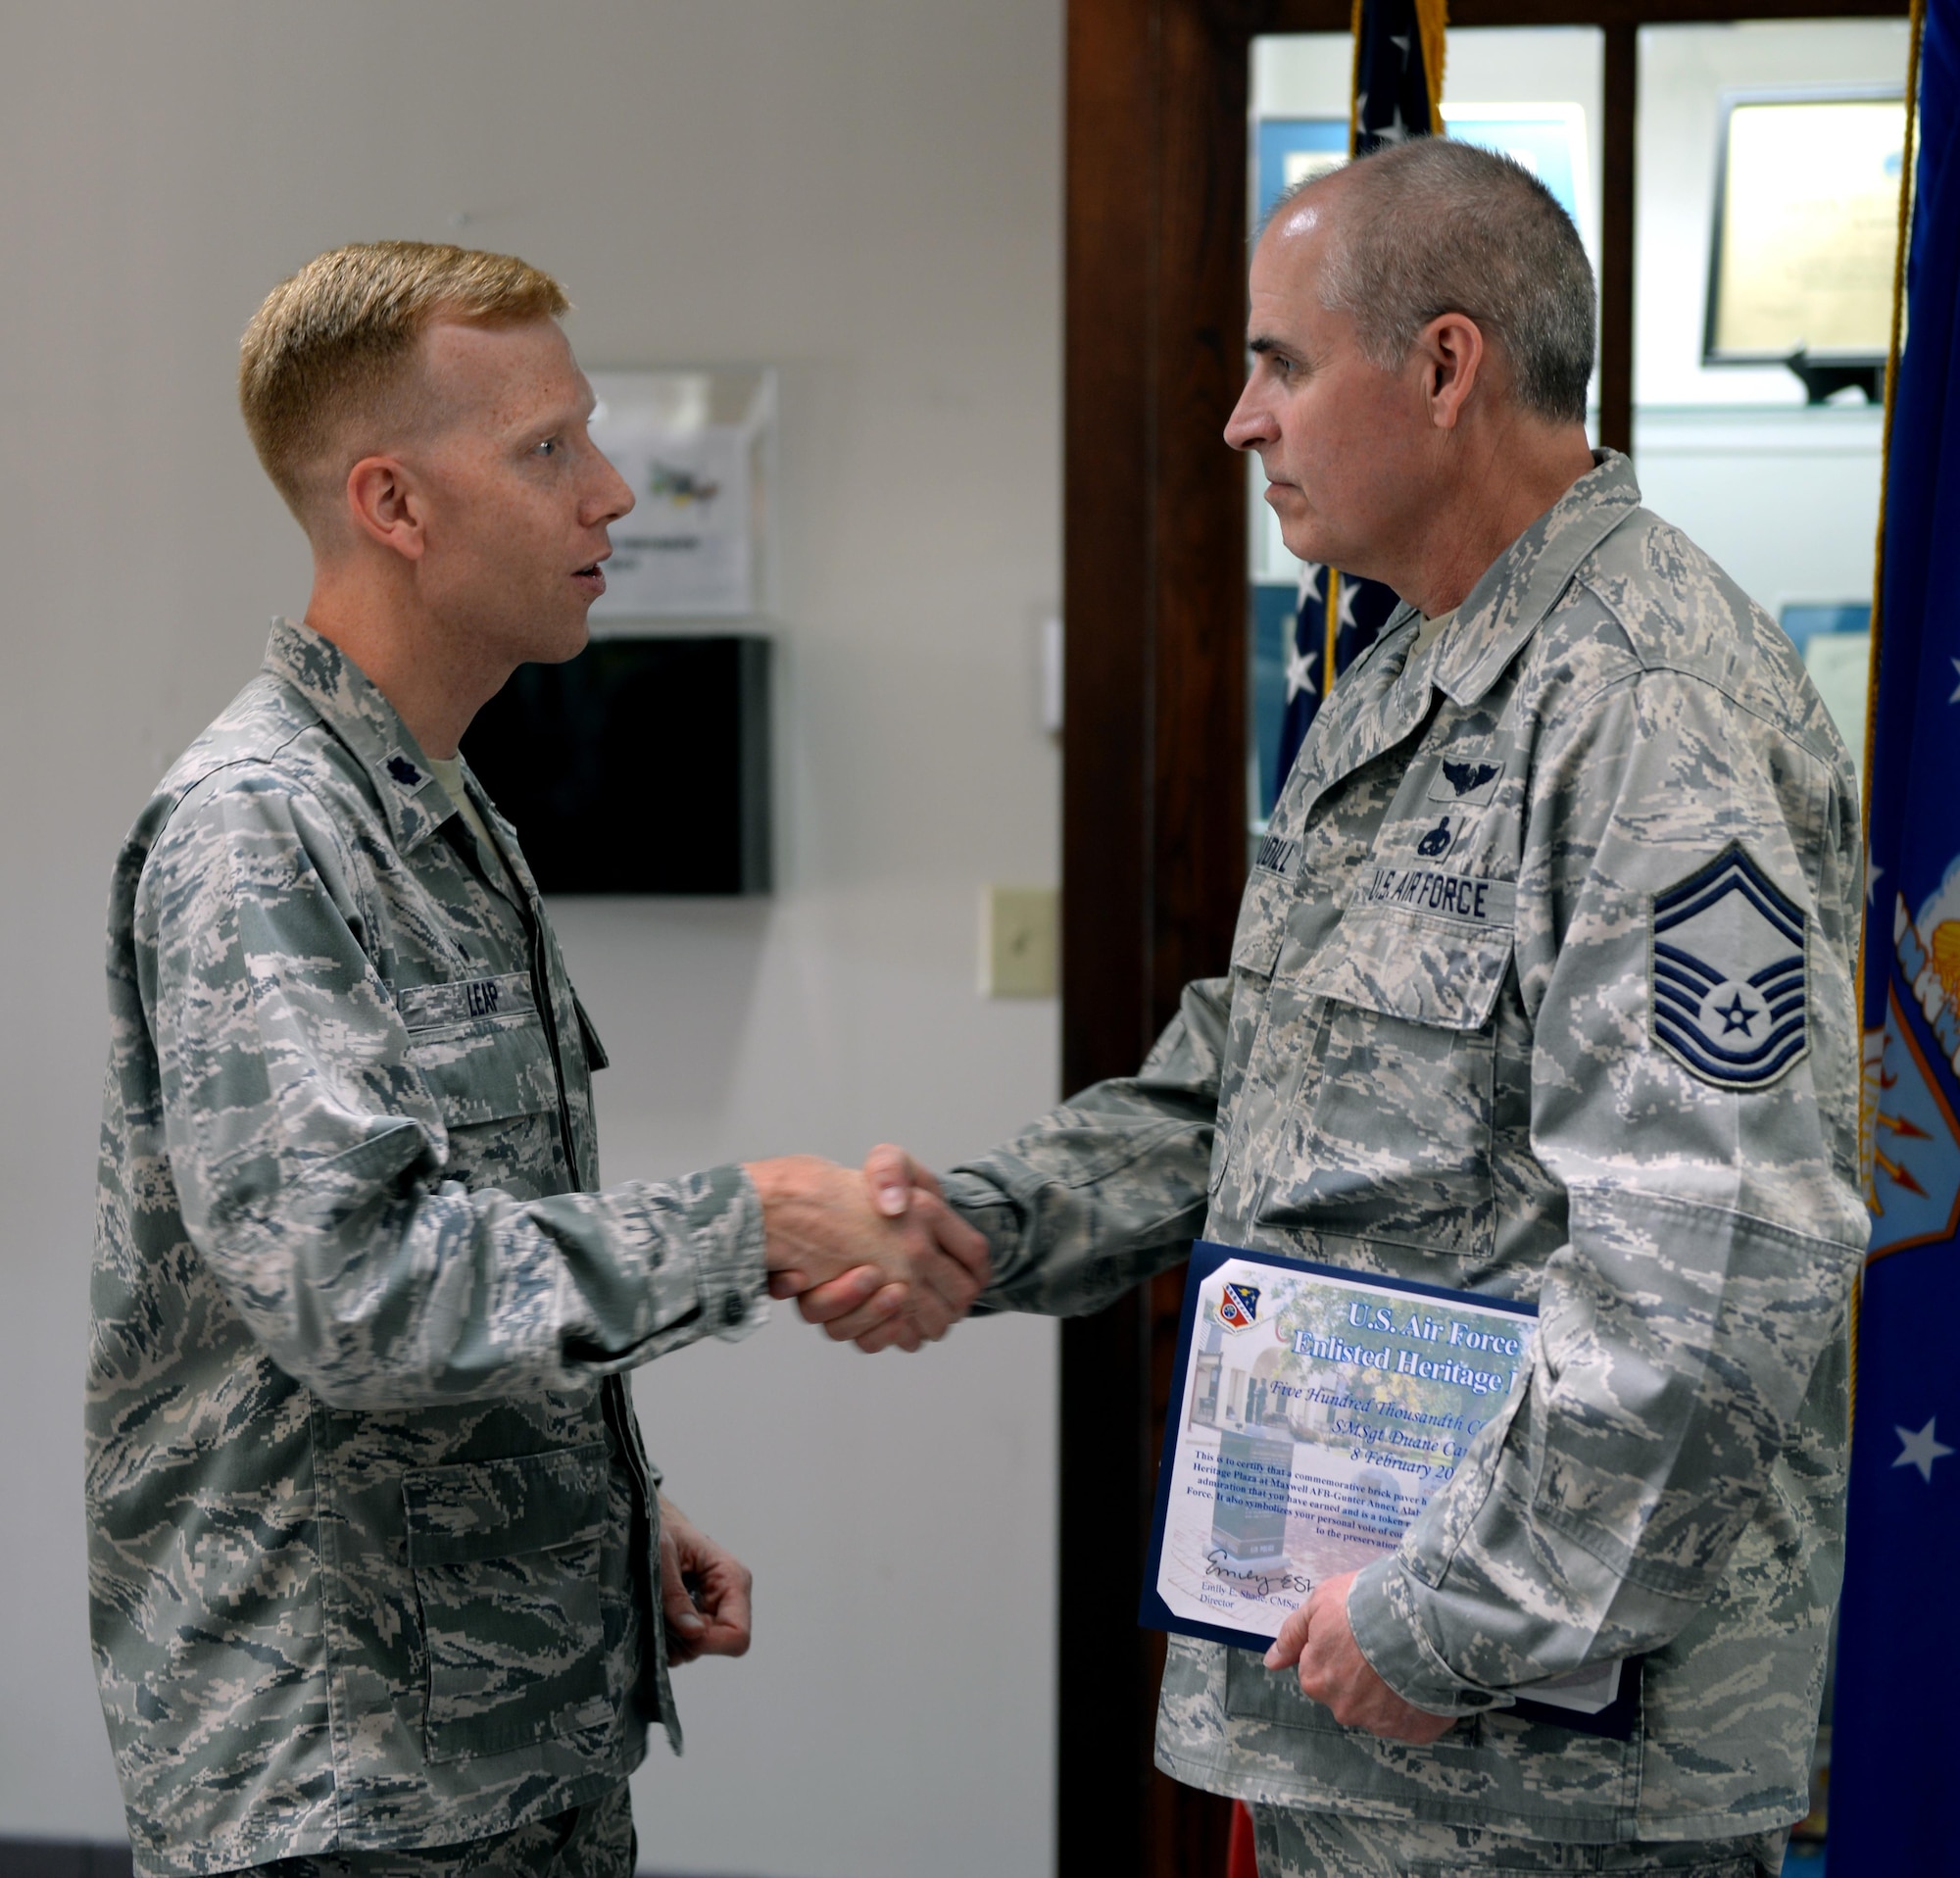 Lt. Col. Nathan Leap, Community College of the Air Force Commandant, presents Senior Master Sgt. Duane Caudill, 302nd Maintenance Group career advisor, with his CCAF degree on Maxwell Air Force Base, Ala., April 21, 2017. Caudill is the 500,000th graduate of the CCAF. It only took Caudill six months to complete the final steps of reaching his goals and obtaining his CCAF degree. (U.S. Air Force photo/Senior Airman Tammie Ramsouer)